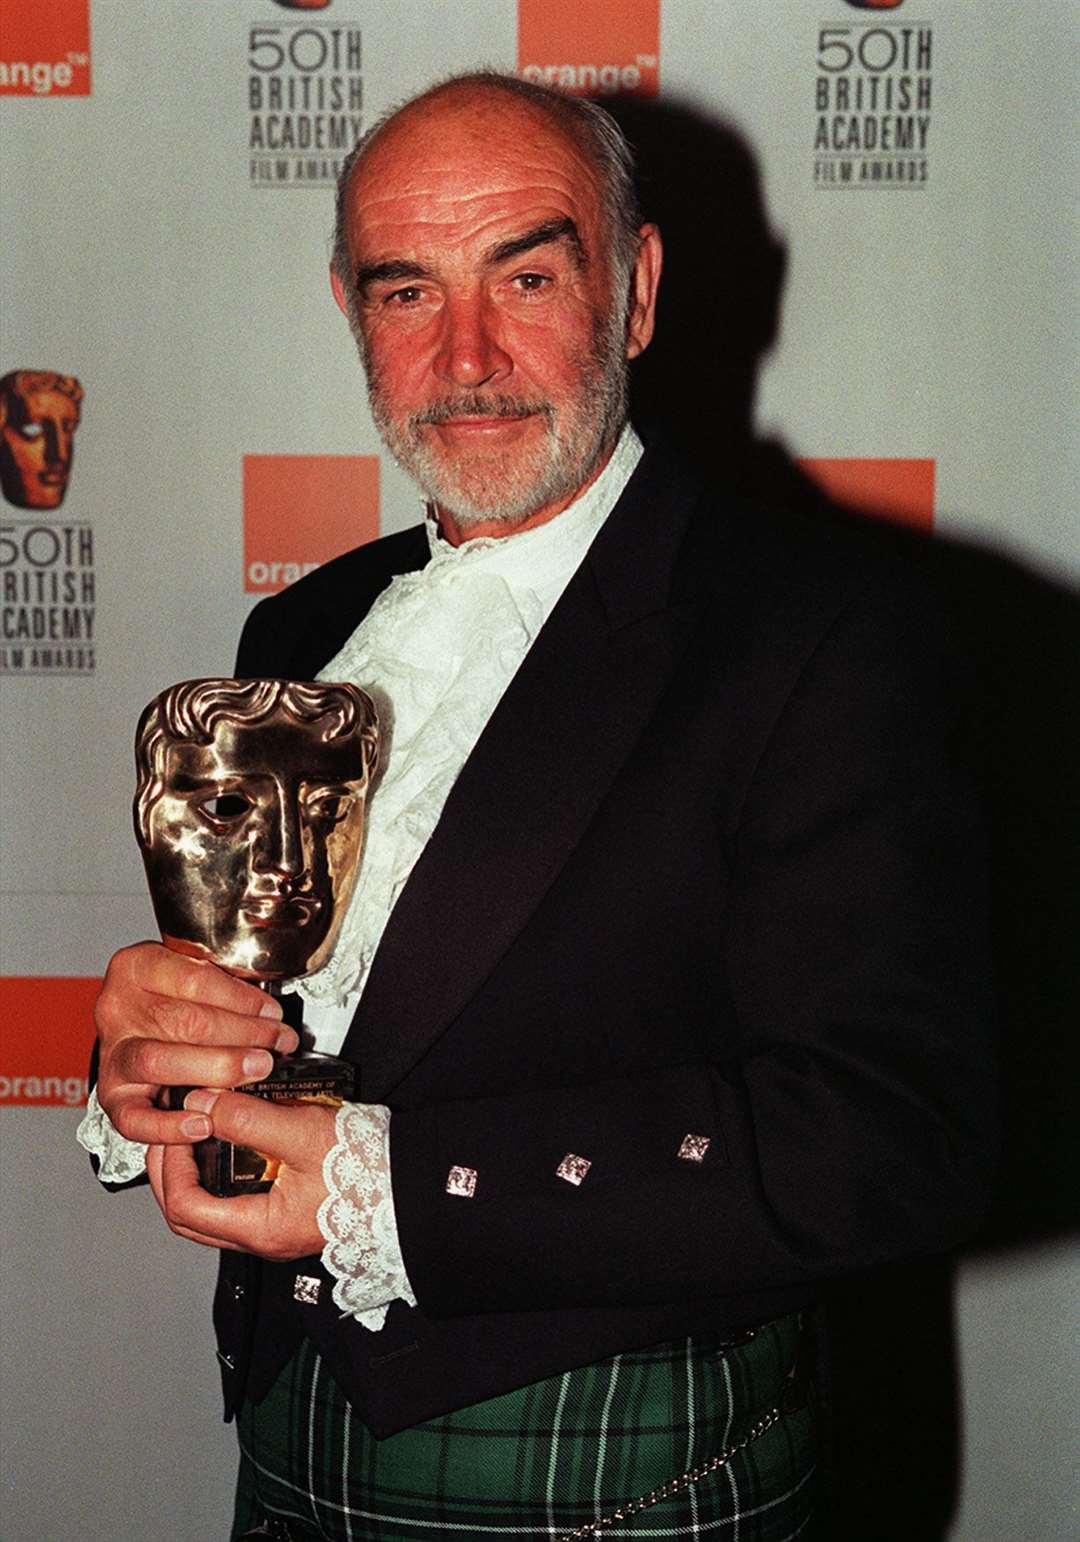 In this 1998 picture, Sir Sean poses with his Fellowship Award at the 50th Bafta Awards (PA)